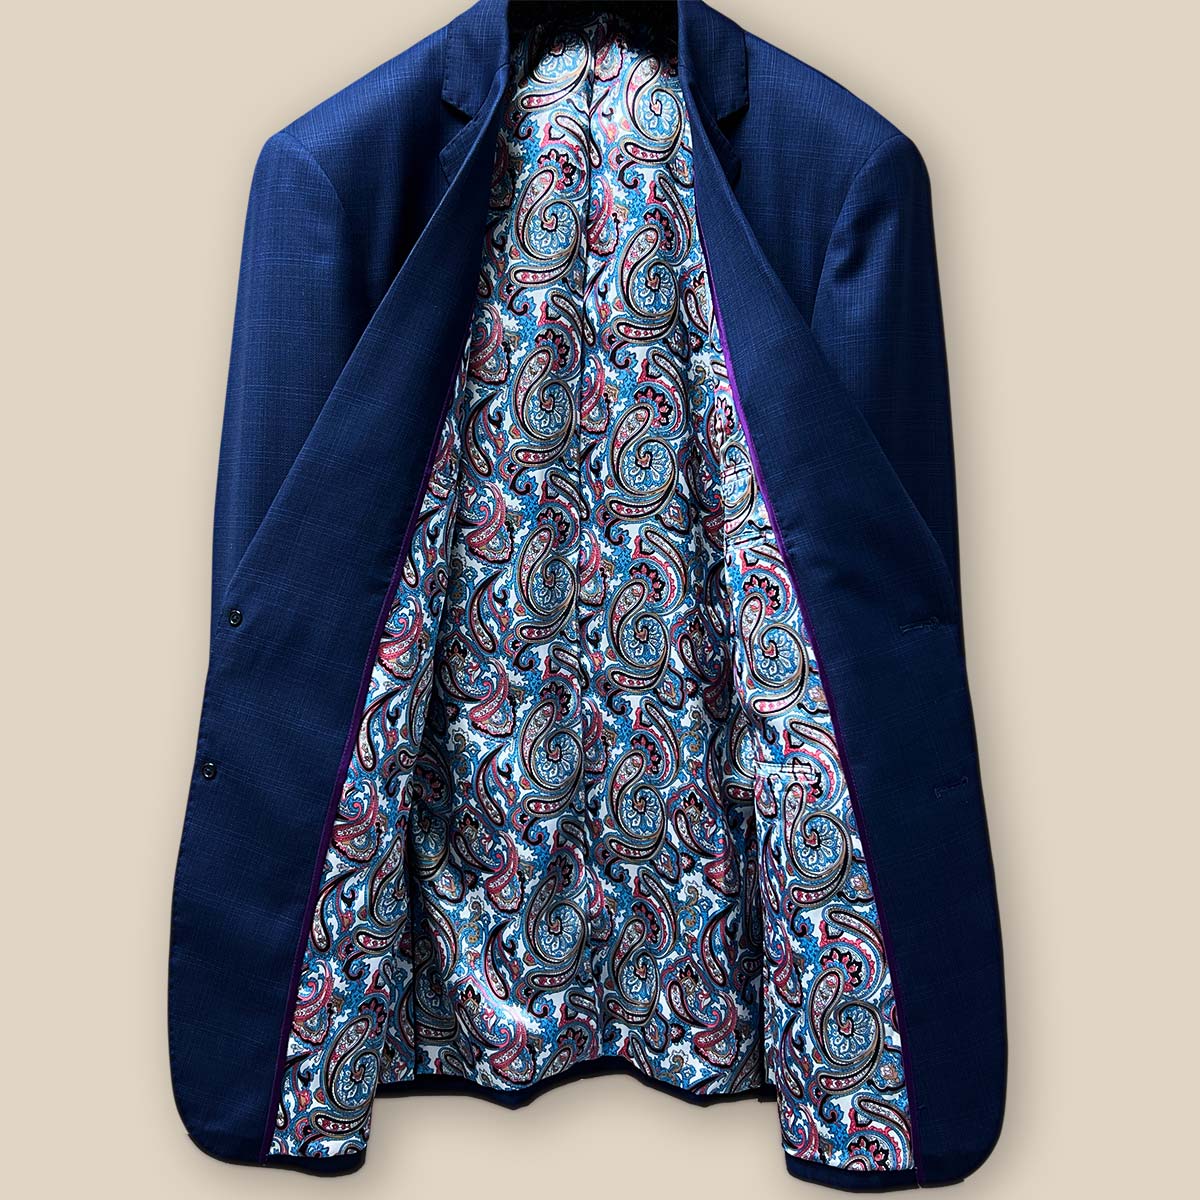 Full inside view of the royal blue suit jacket highlighting the vibrant paisley print lining.